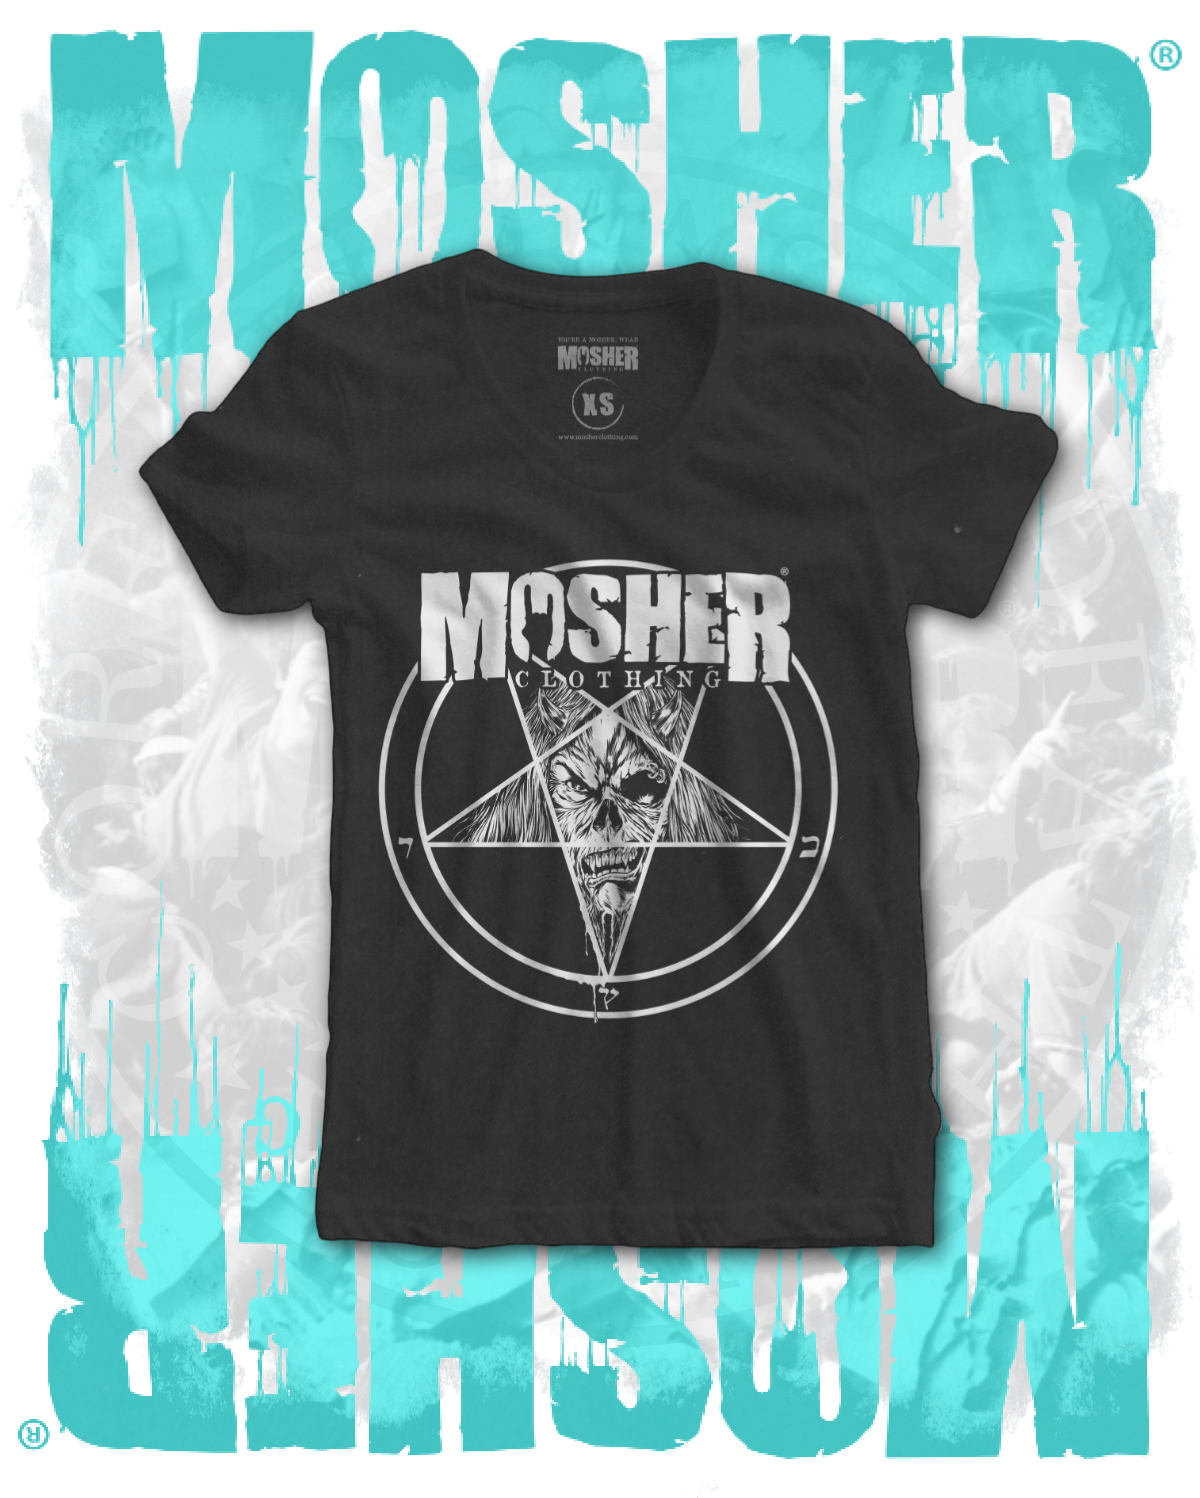 Women's Mosher Pete-agram for metalheads by Mosher Clothing